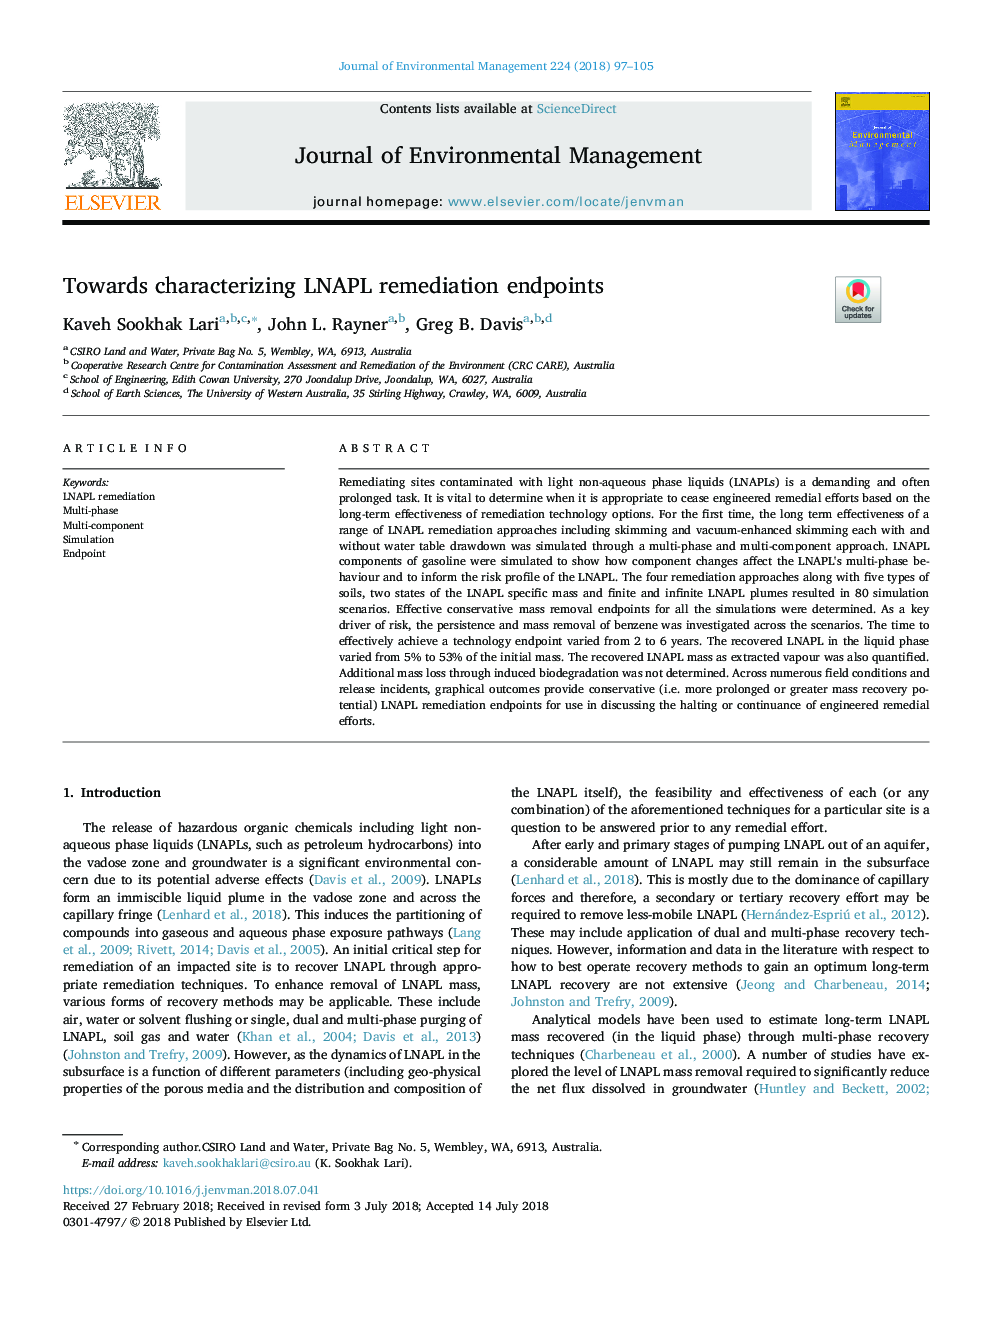 Towards characterizing LNAPL remediation endpoints